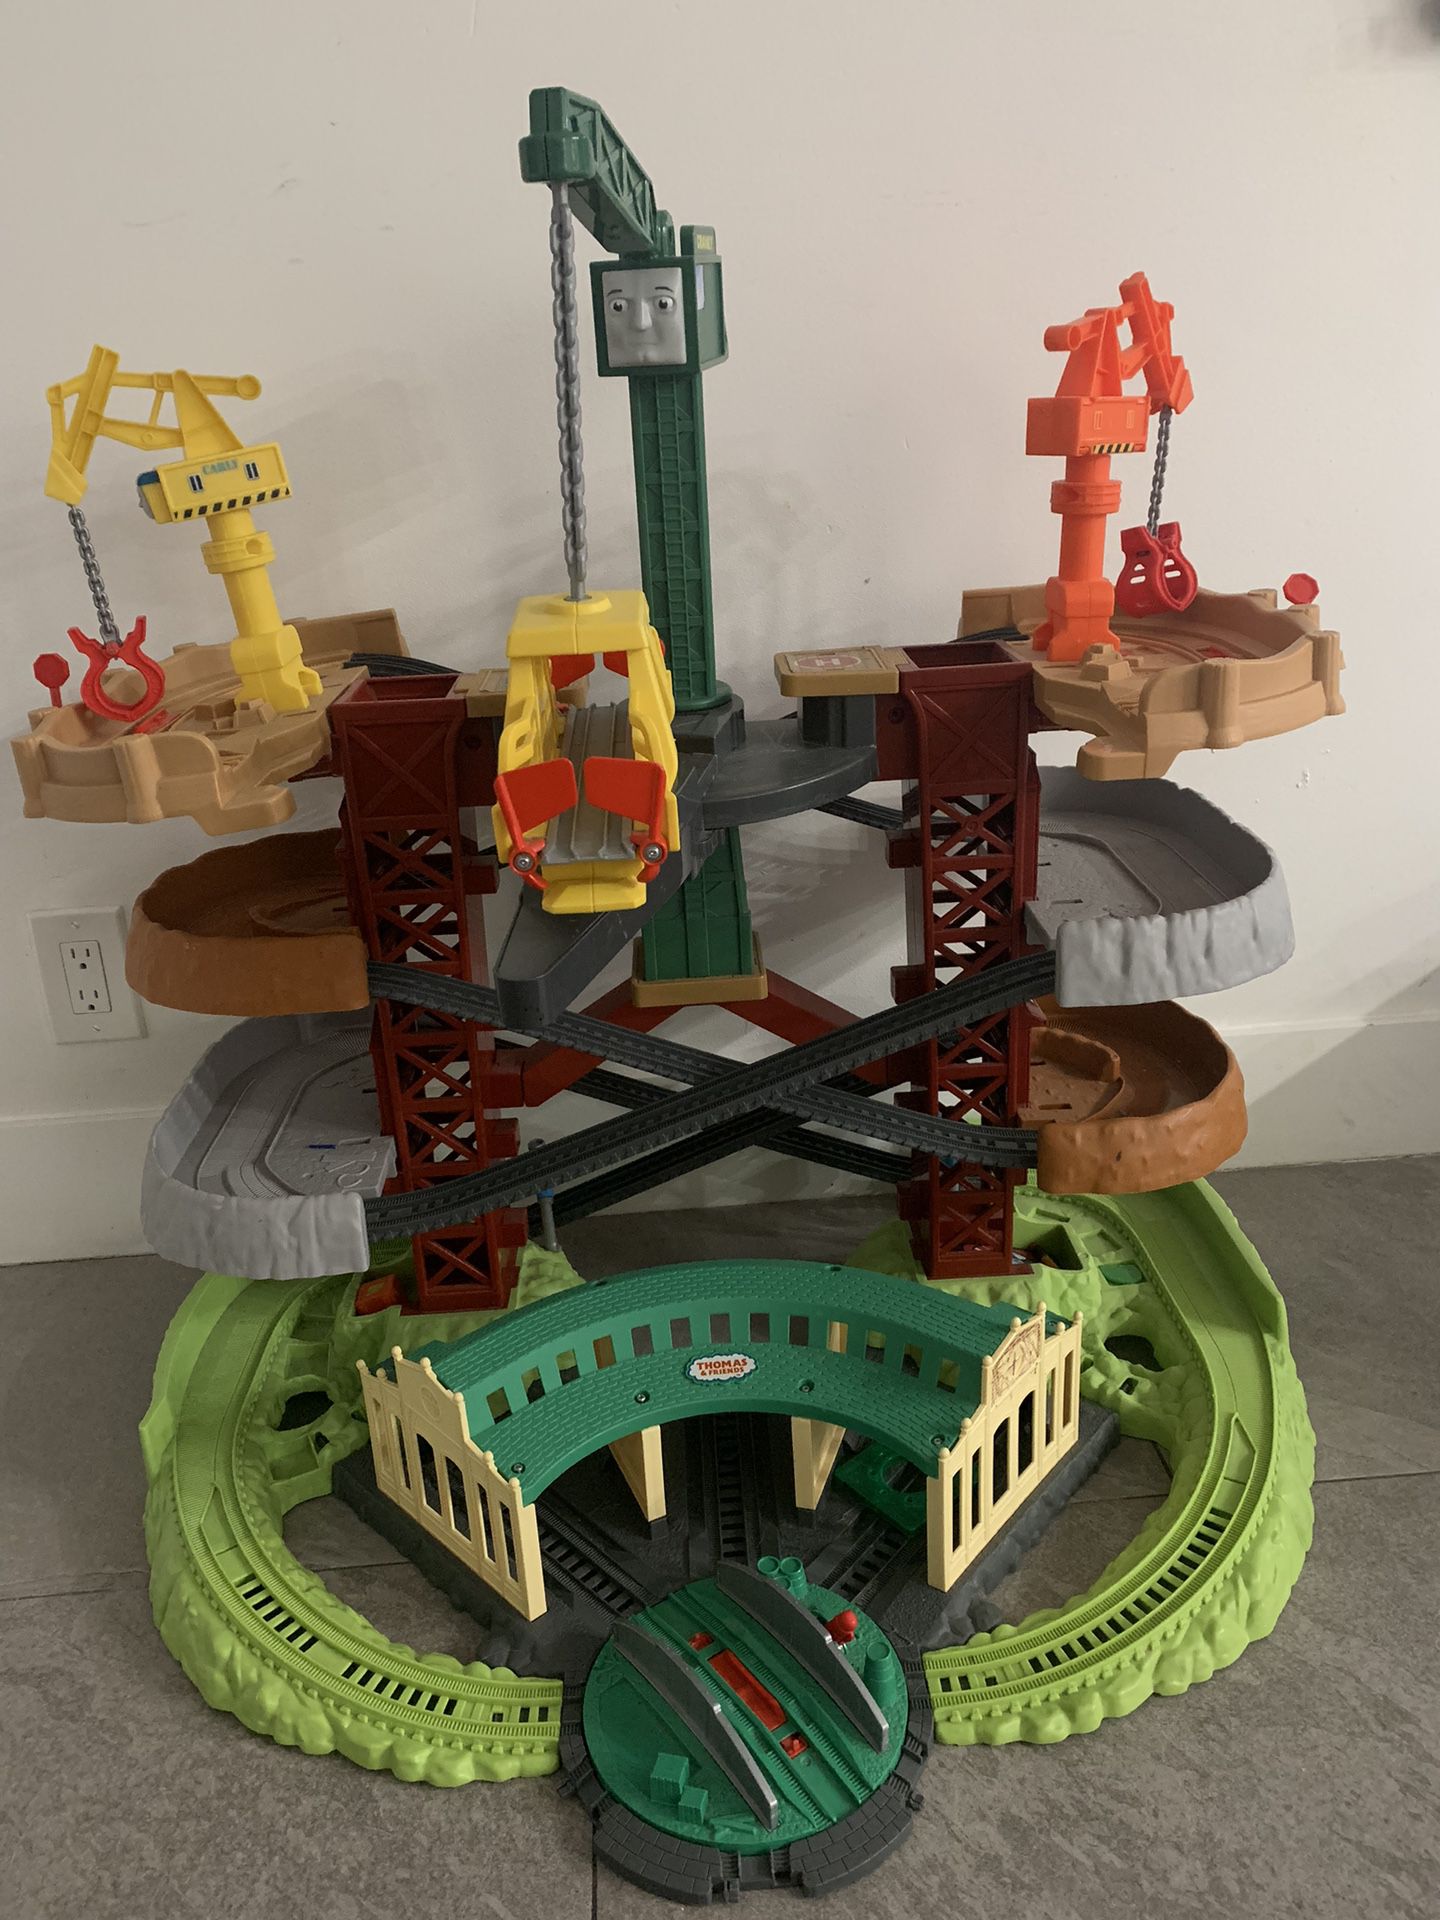 Thomas & Friends Multi-Level Track Set Trains & Cranes Super Tower with Thomas & Percy Engines plus Harold for Preschool 